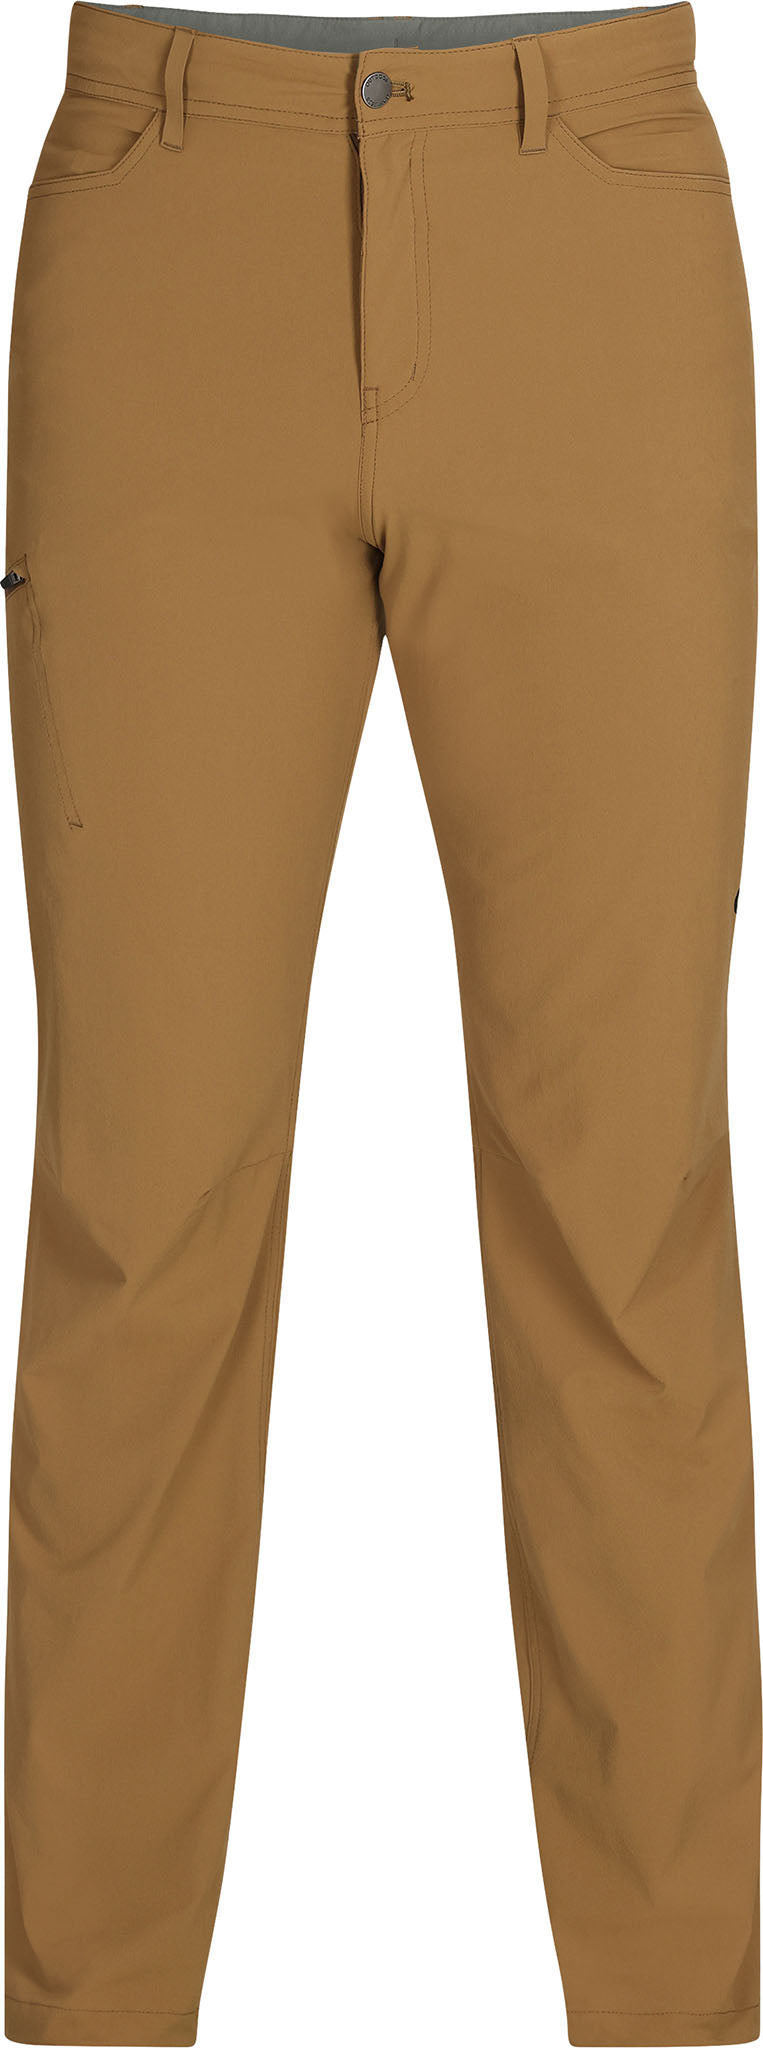 Under Armour Men's Storm Covert Pants, Coyote Brown/Coyote Brown